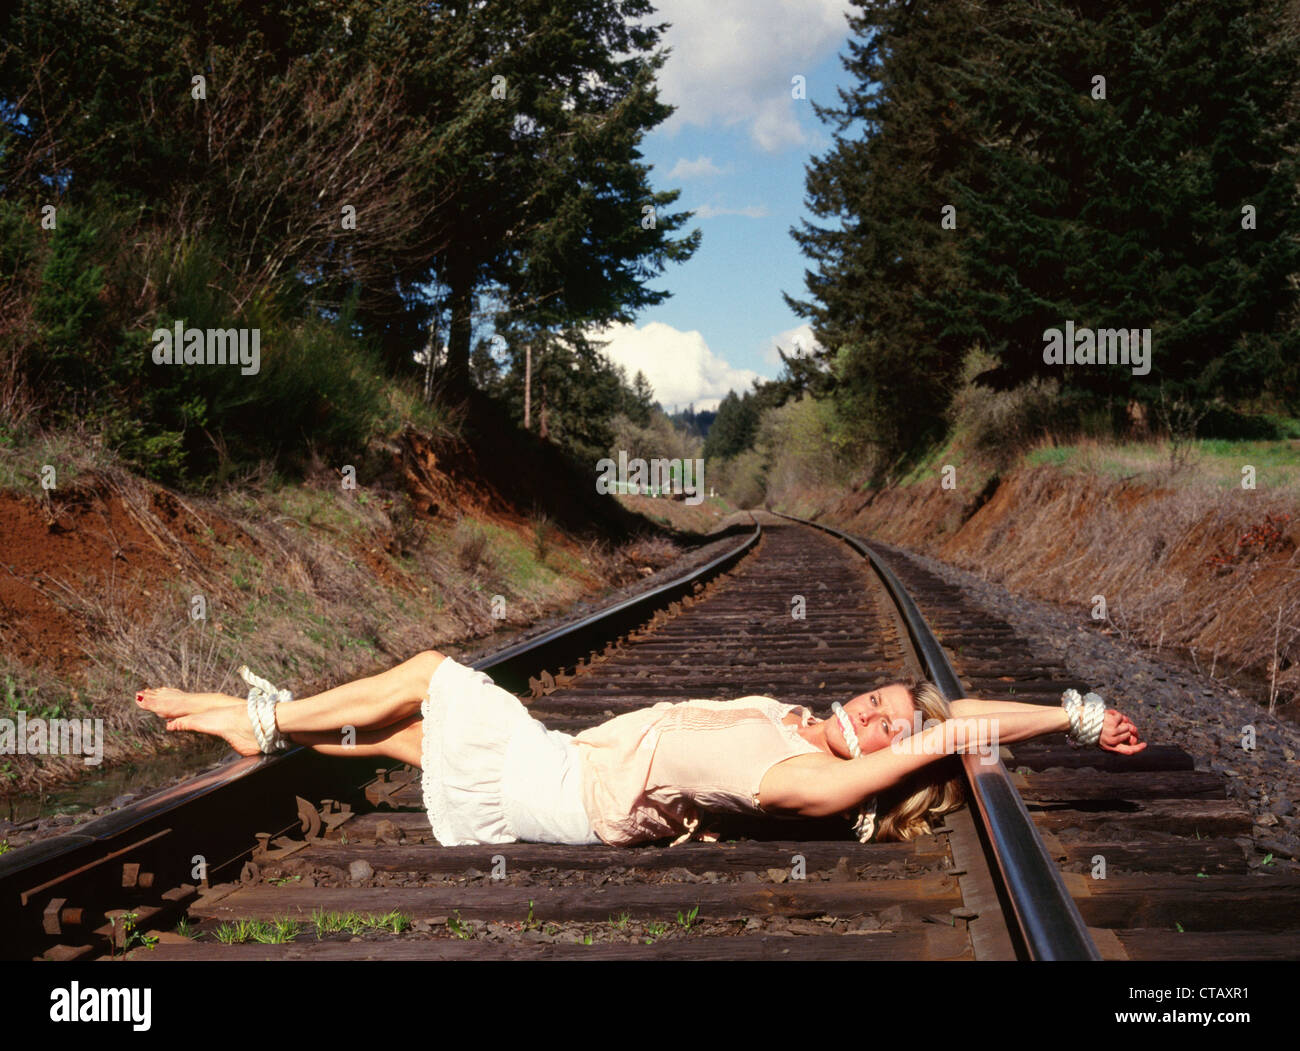 A woman tied on some railroad tracks like a 'damsel in distress.' Stock Photo